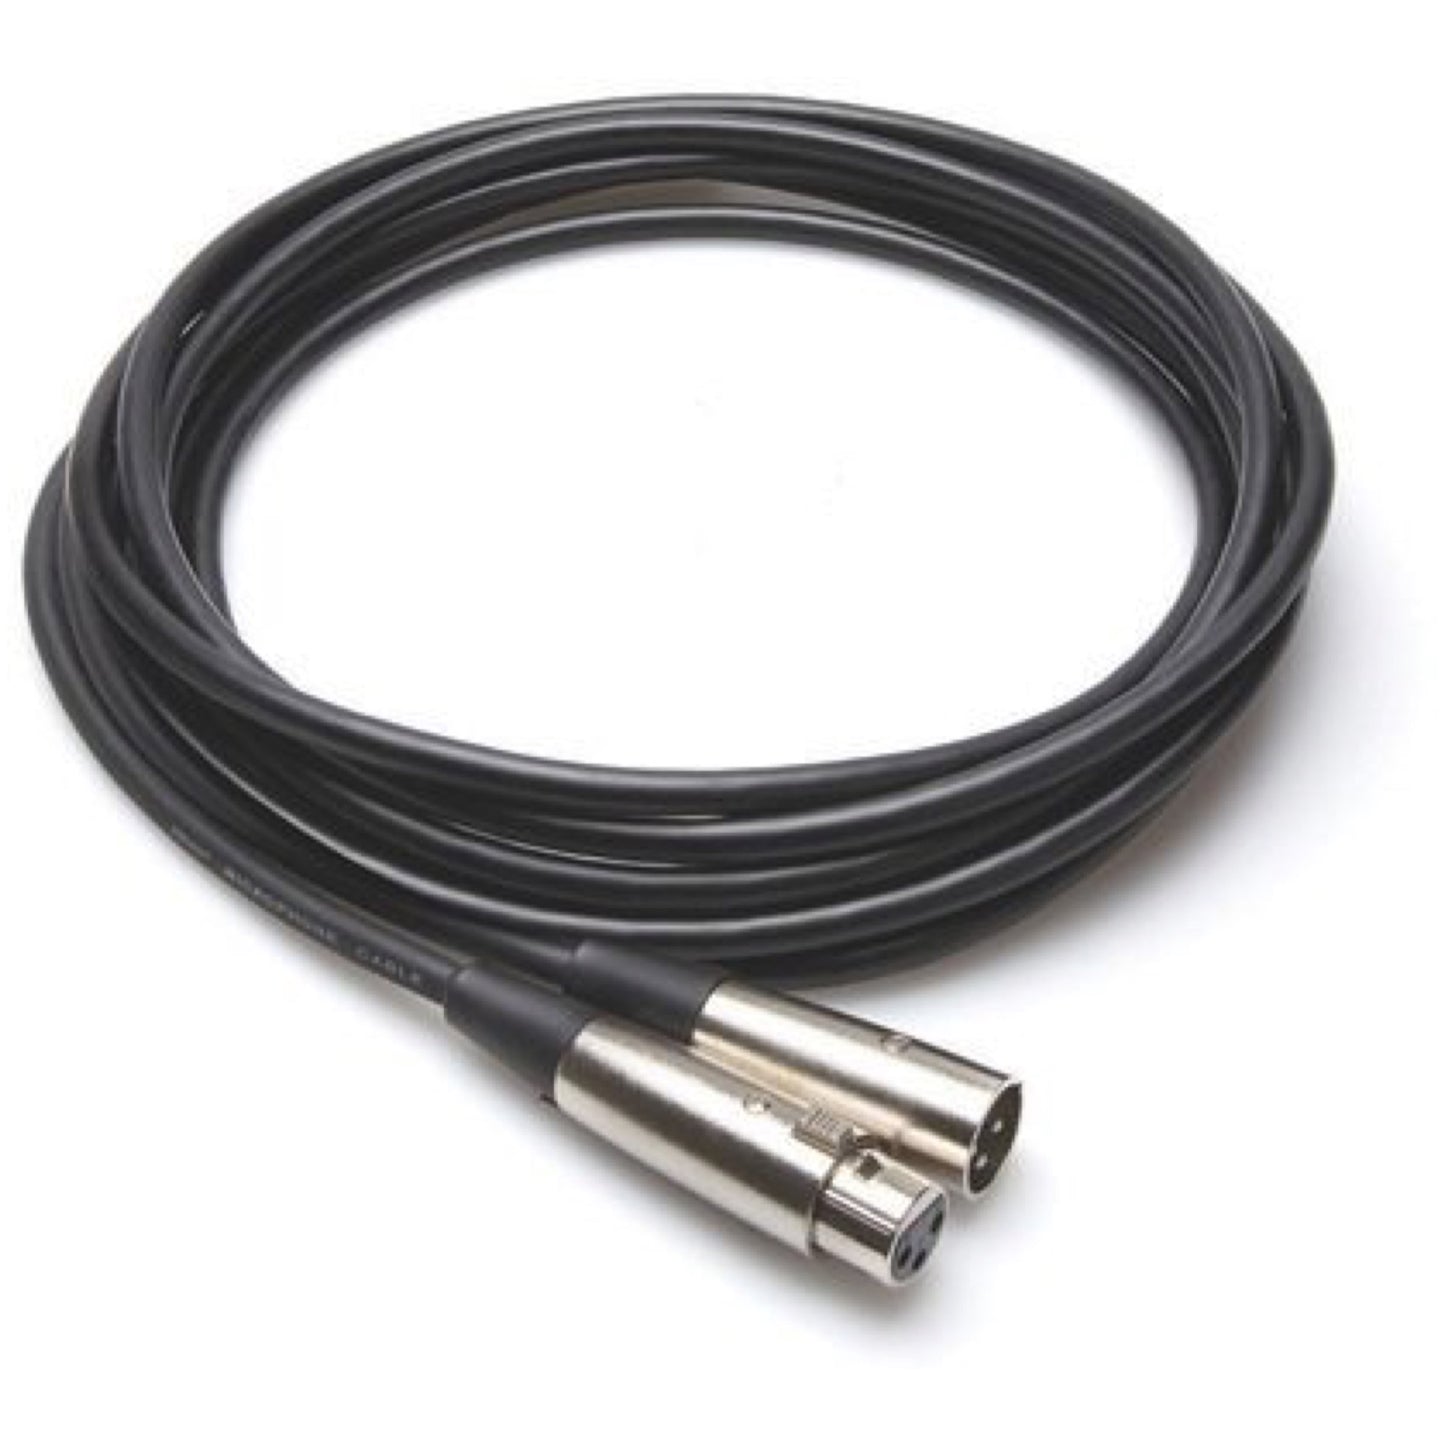 Hosa MCL XLR Microphone Cable, MCL1100, 100 Foot